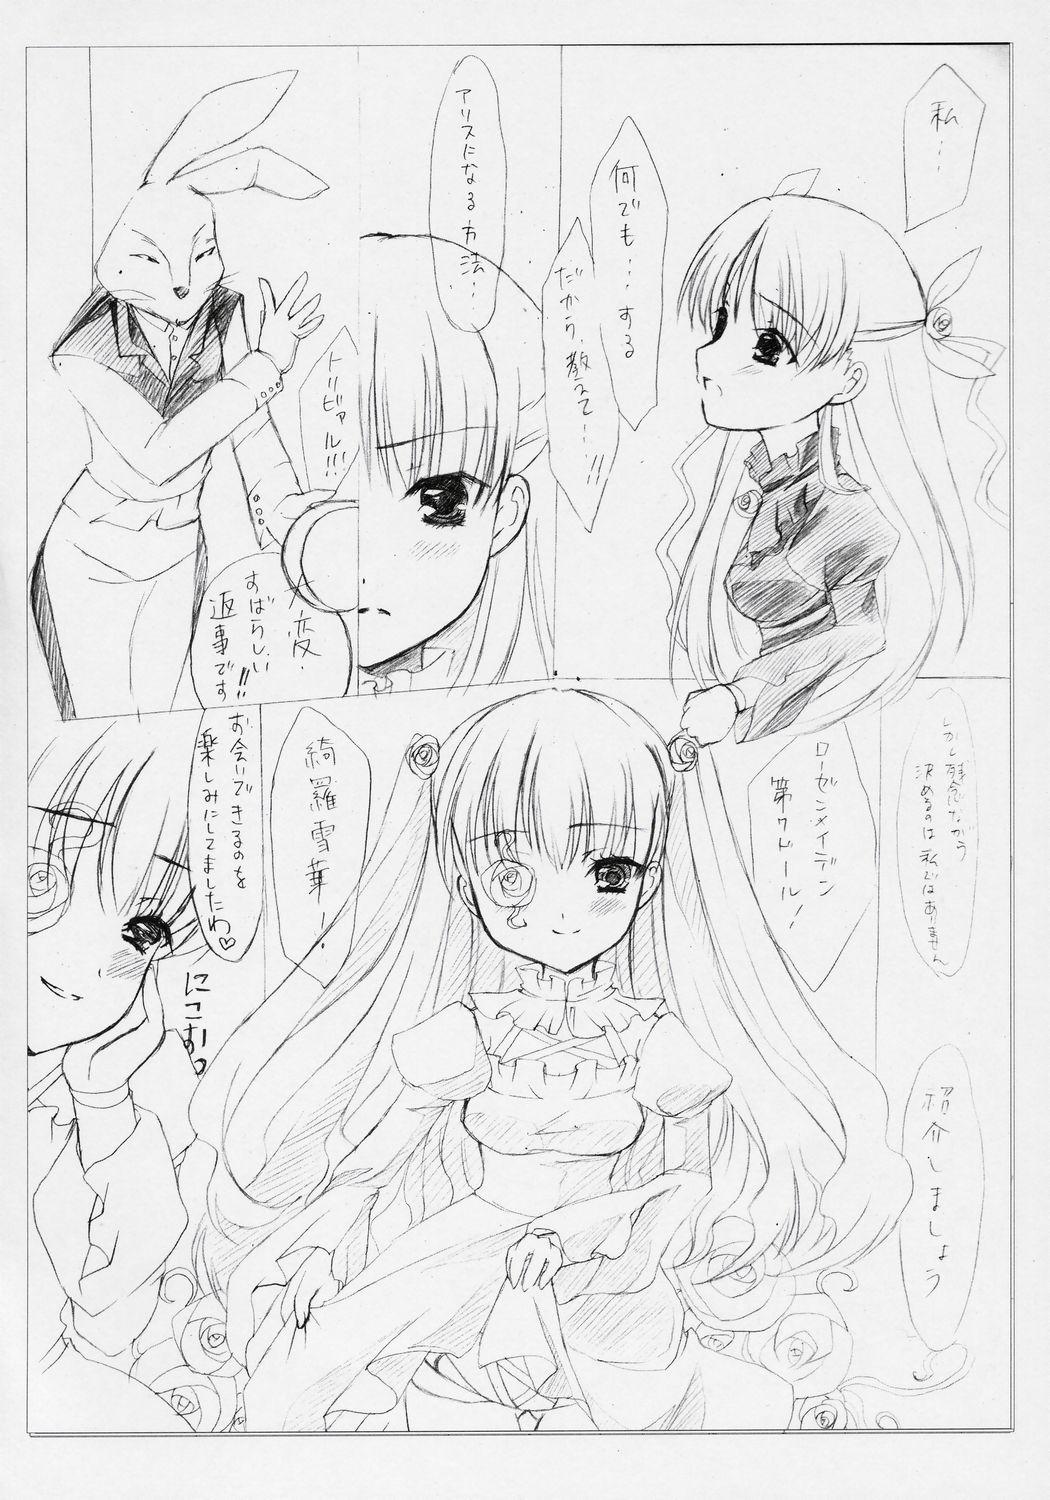 Messy NEW BORN BABY - Rozen maiden Gets - Page 7